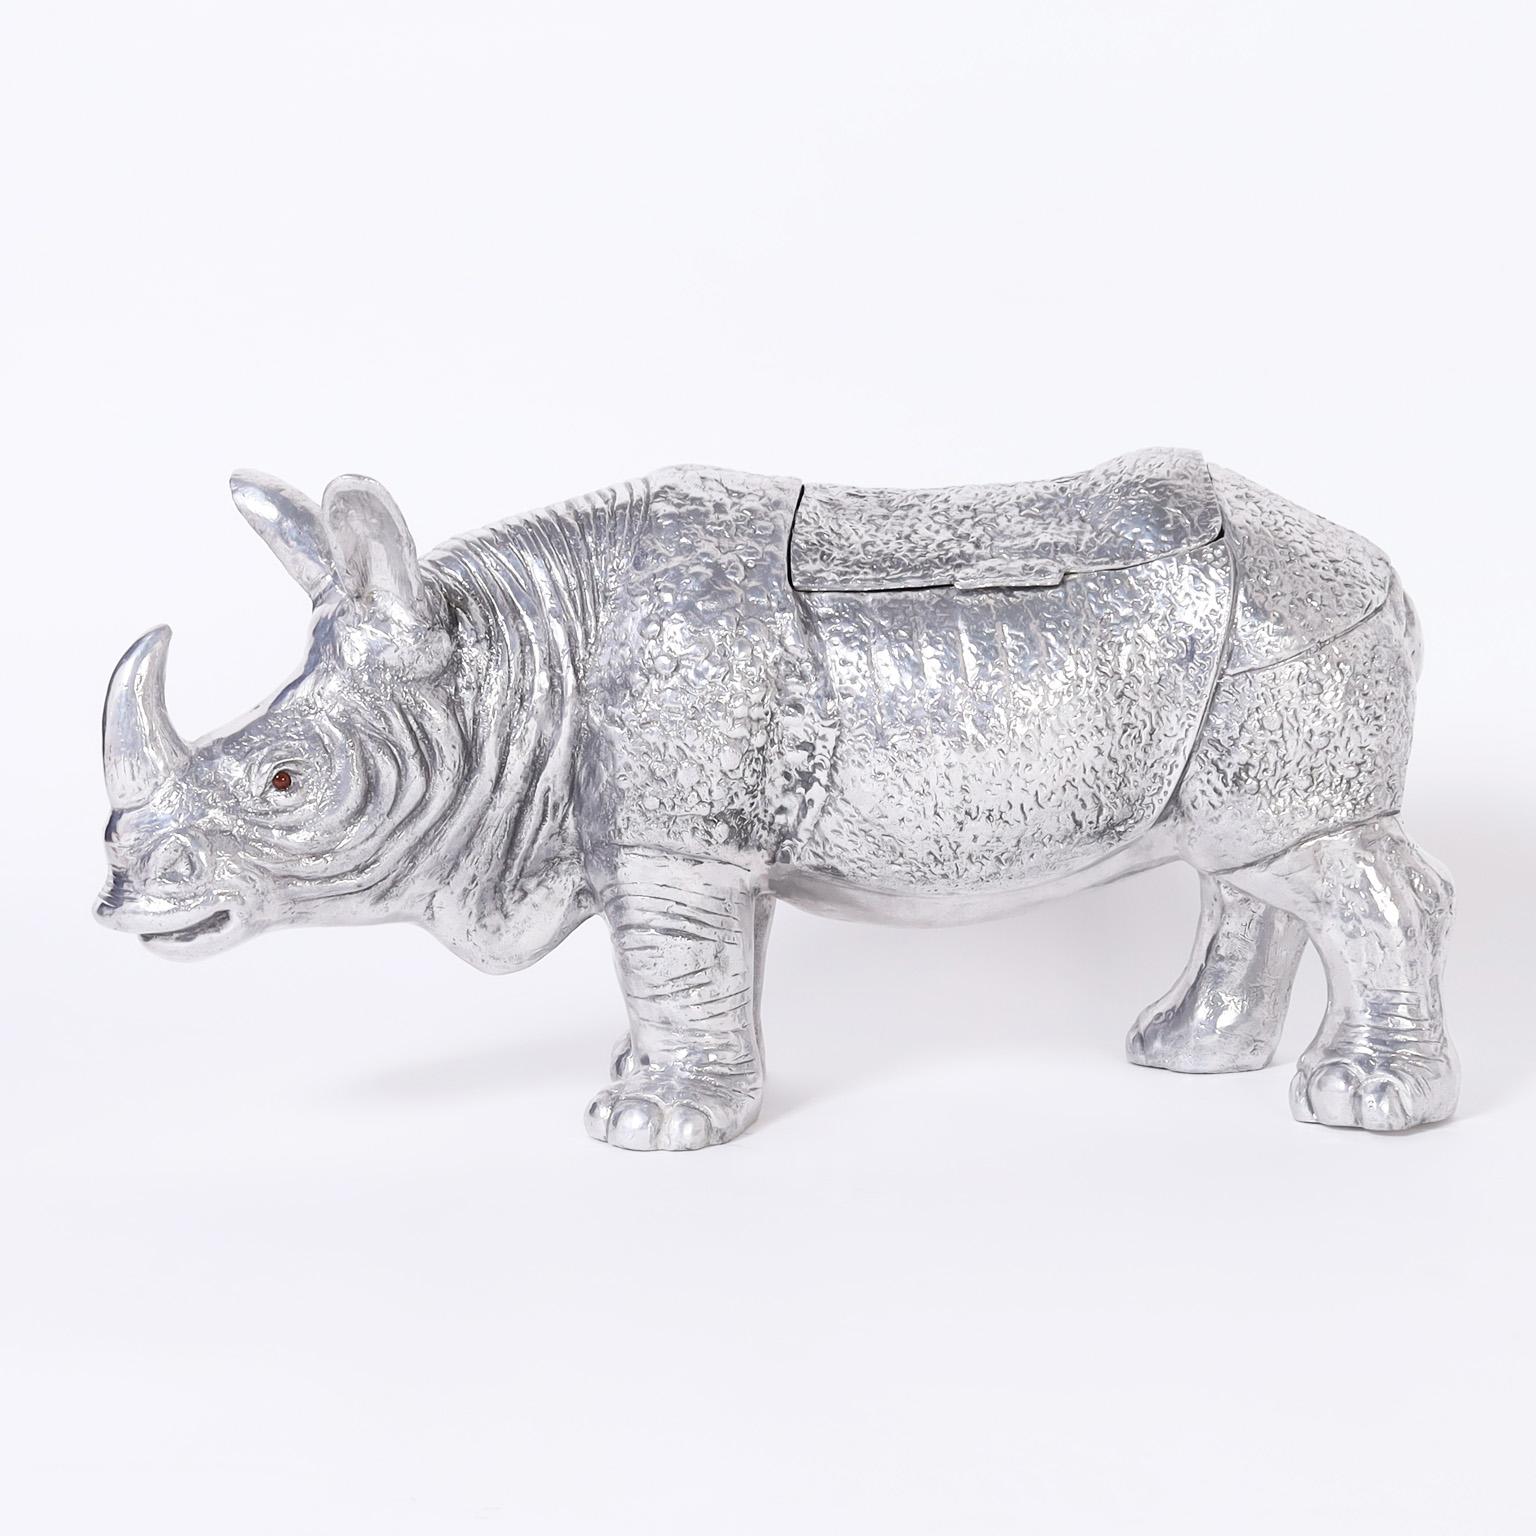 Striking mid-century sculpture of a Rhinoceros cast in aluminum with its iconic profile and lidded storage compartment.